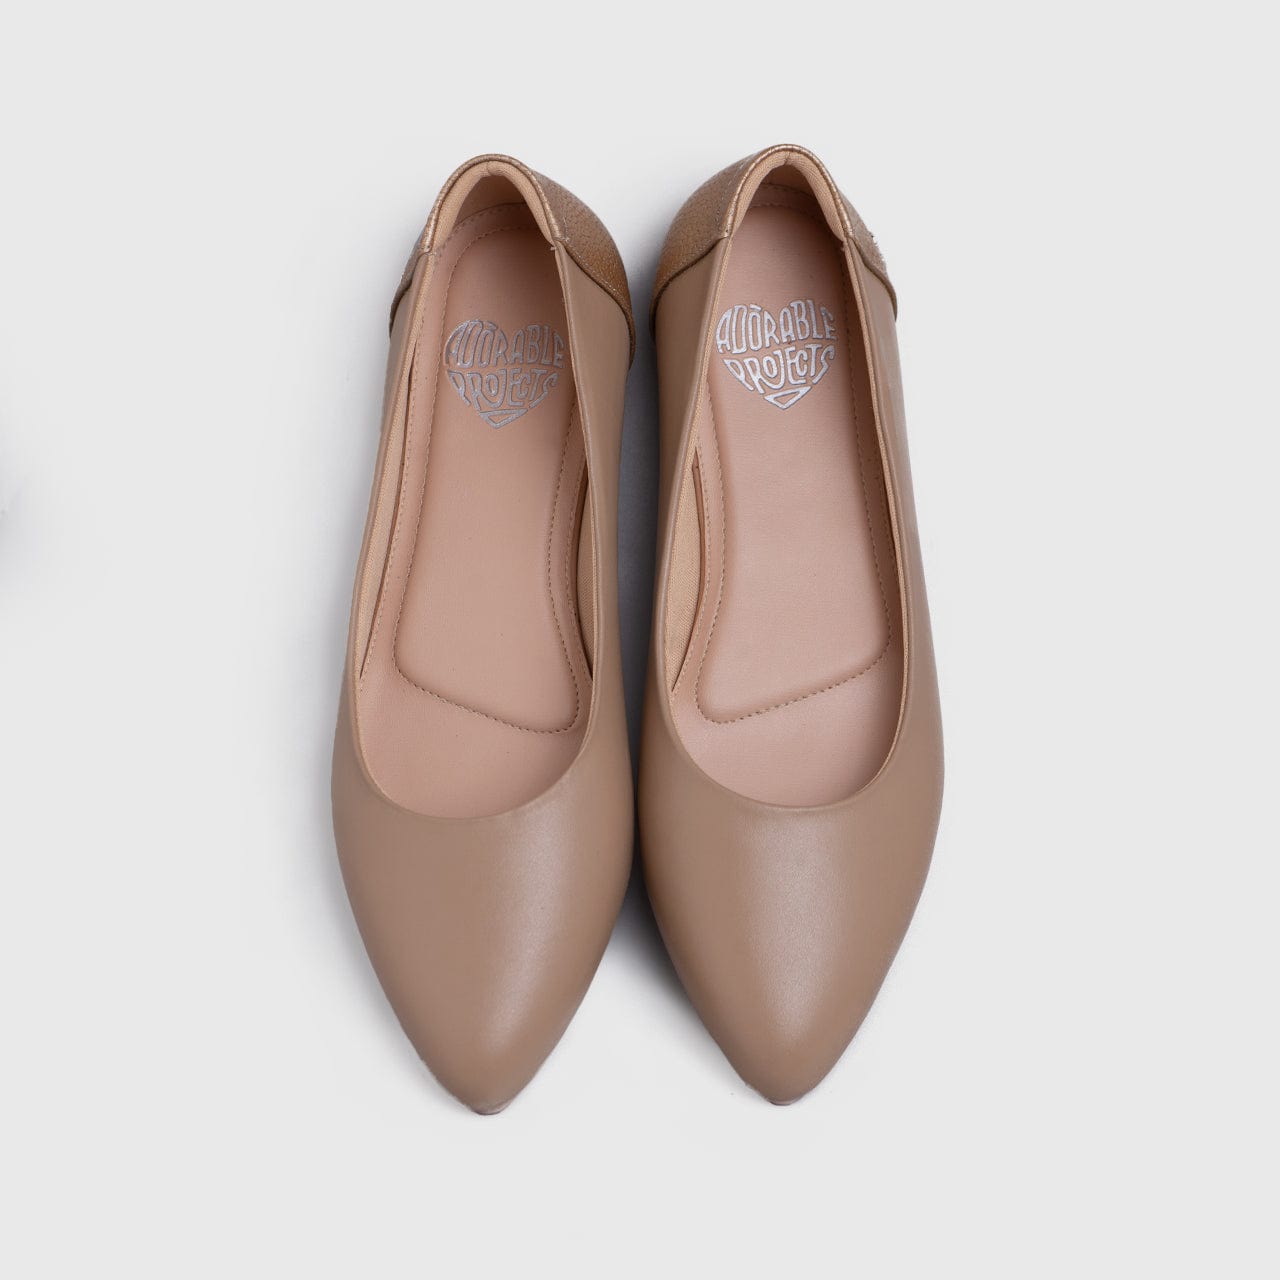 Adorable Projects Official Adorableprojects - Ariella Flat Shoes Genuine Leather Cuban Sand